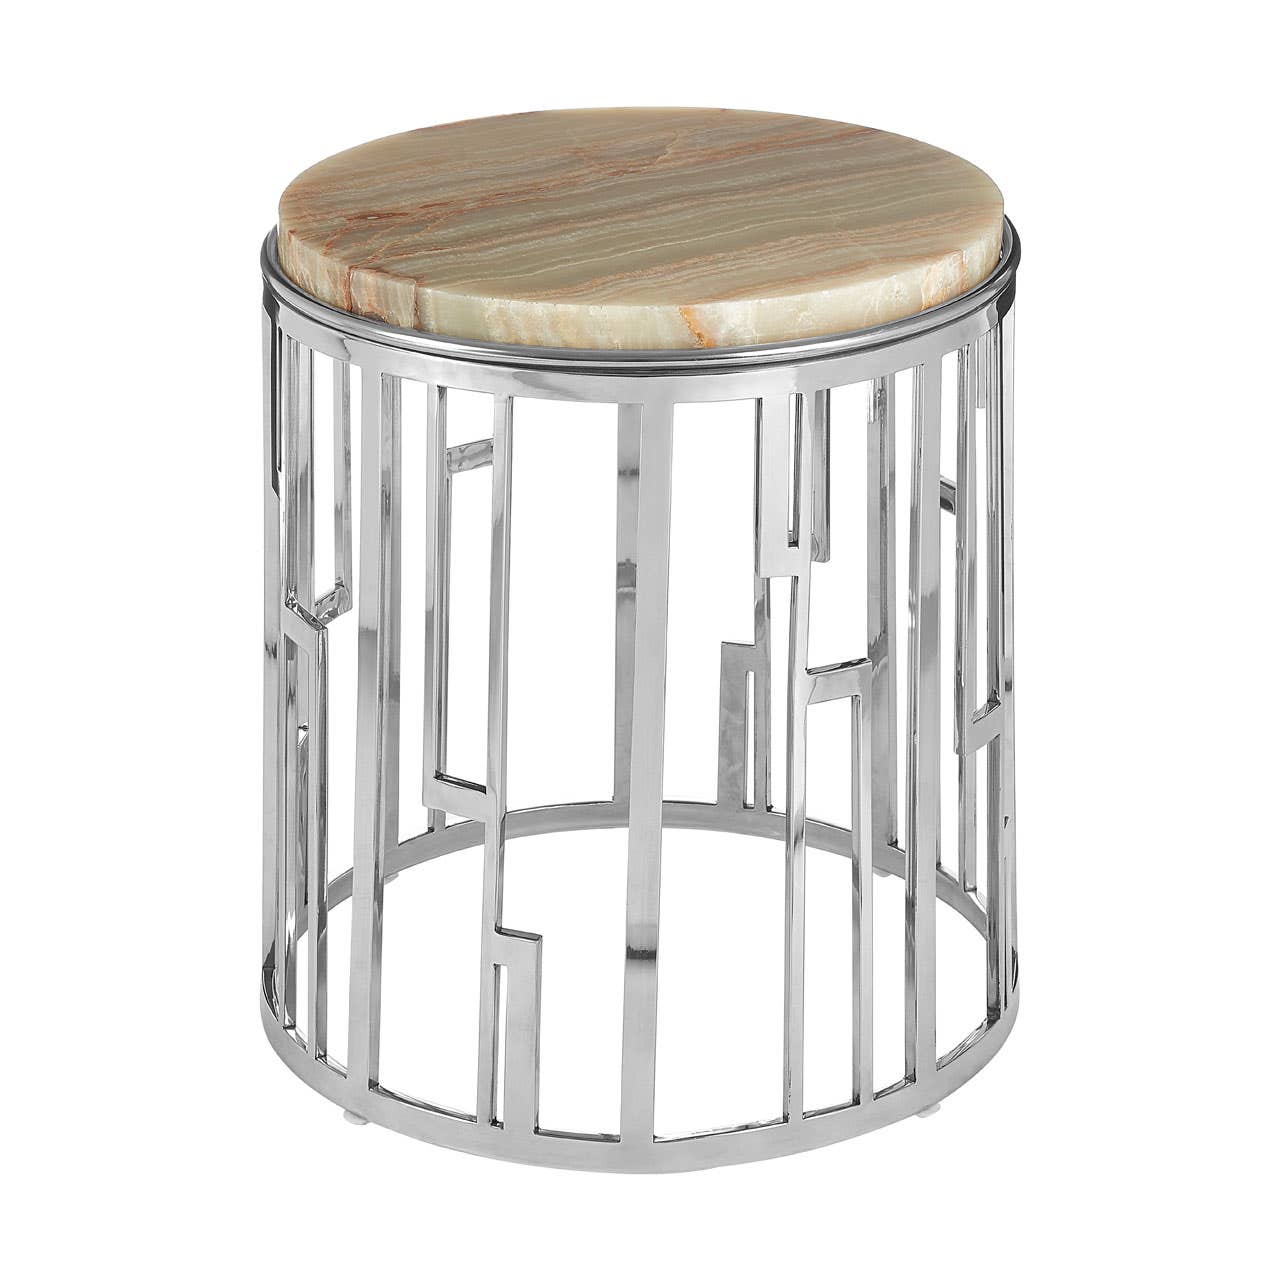 Relic Onyx Stone Side Table